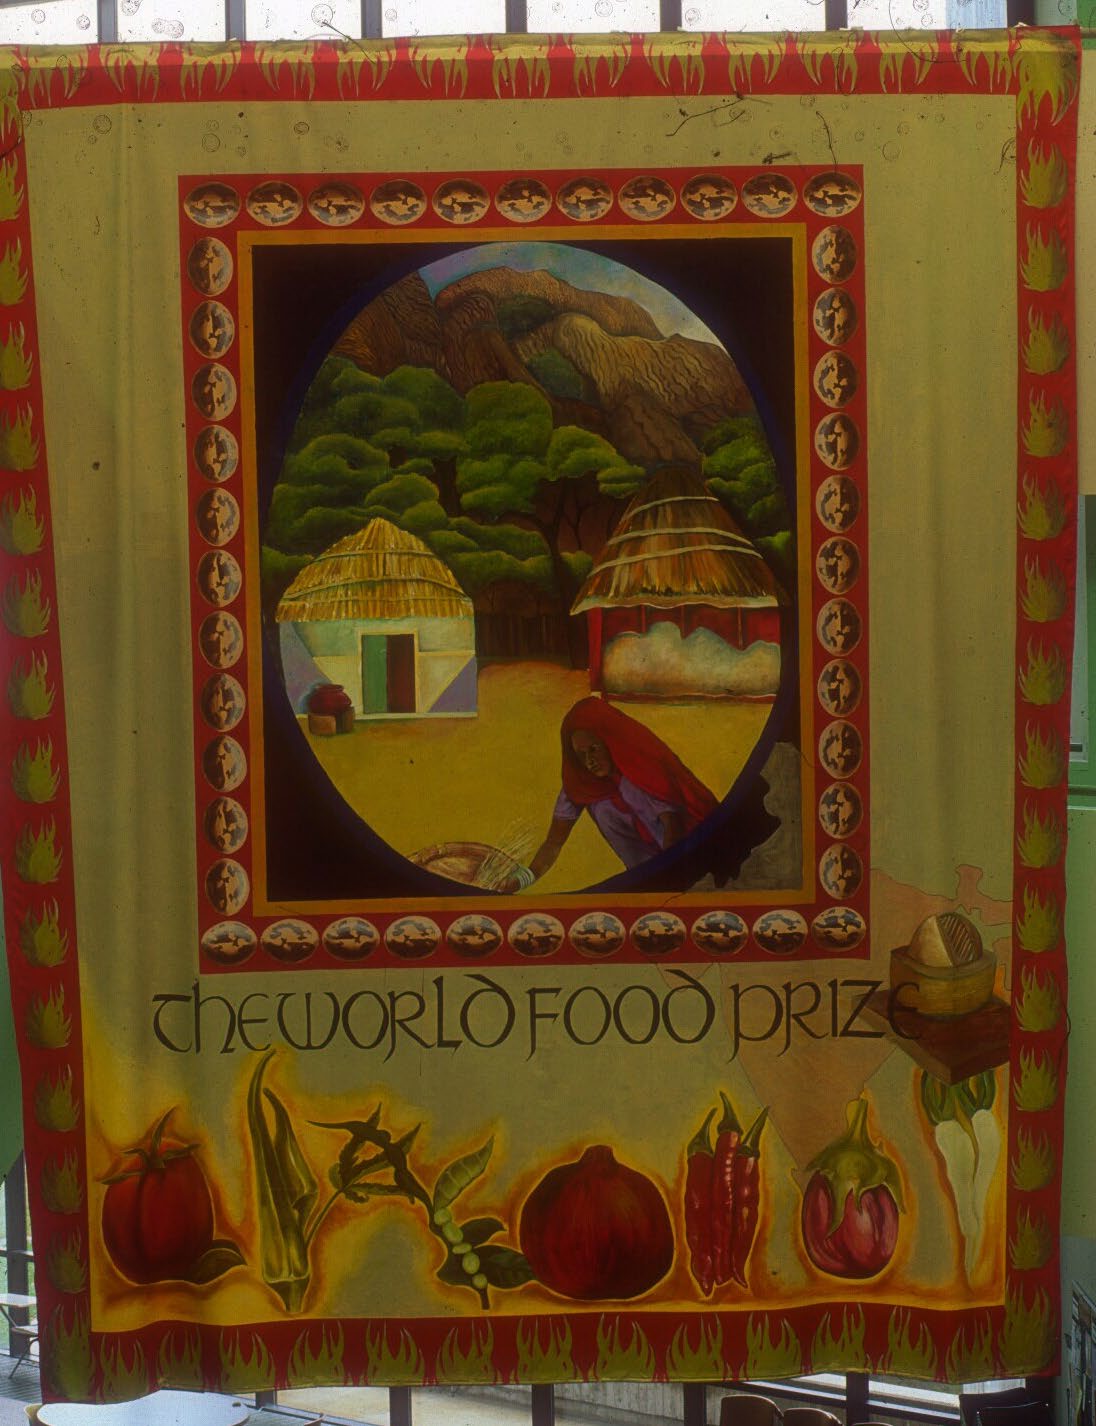 World Food Prize Commission